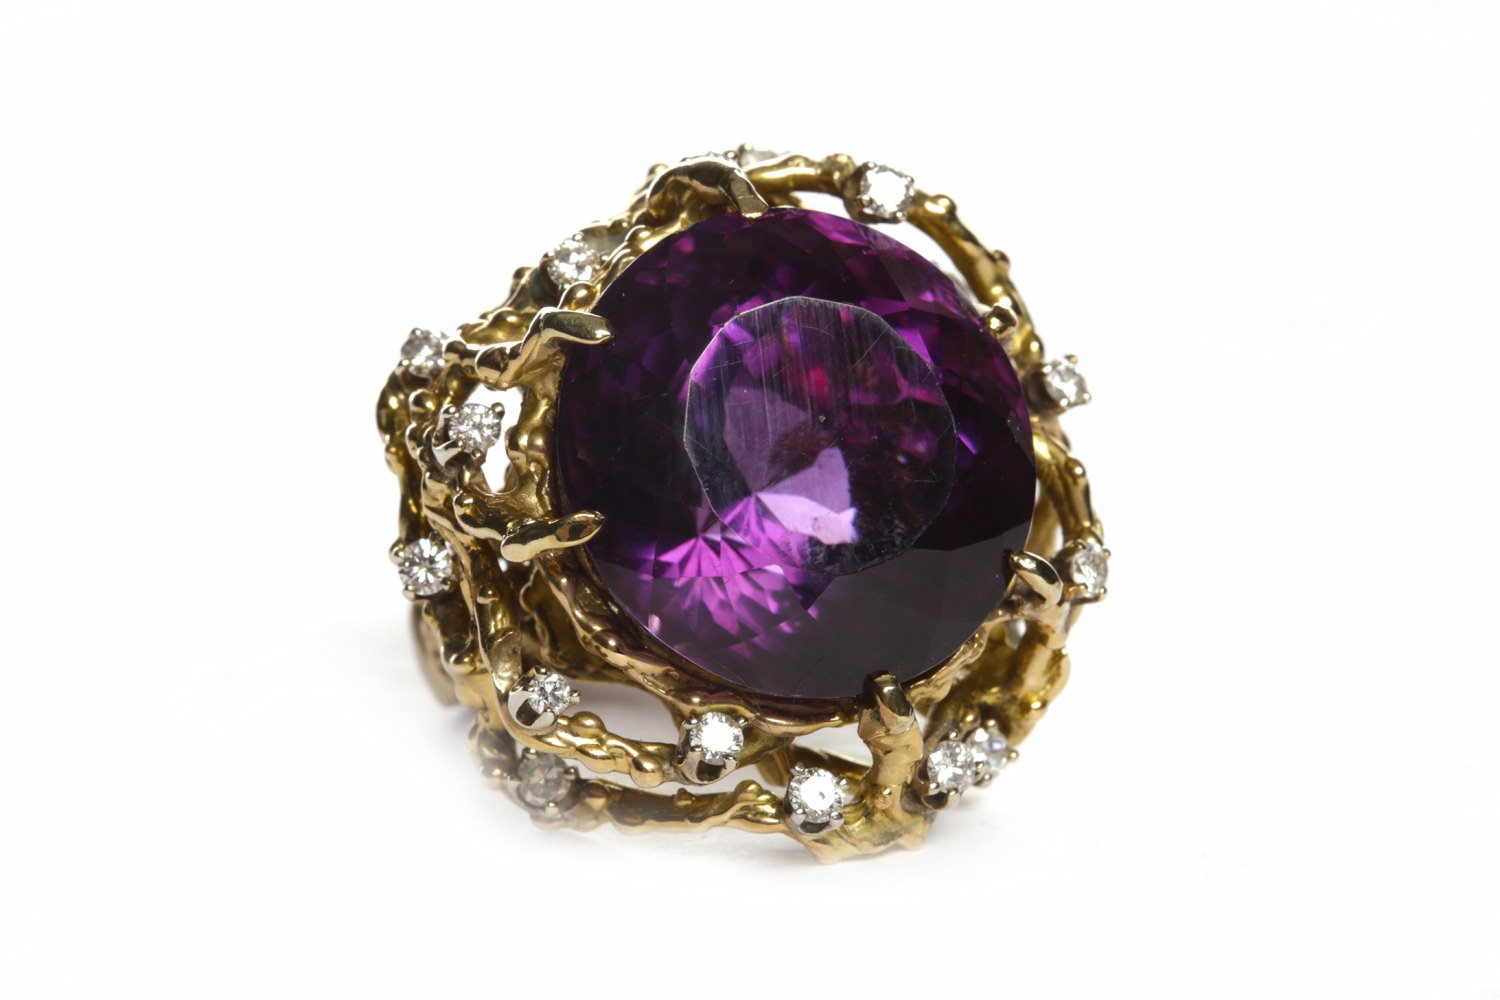 IMPRESSIVE 1970S AMETHYST AND DIAMOND DRESS RING set with a large round faceted amethyst - Image 2 of 2